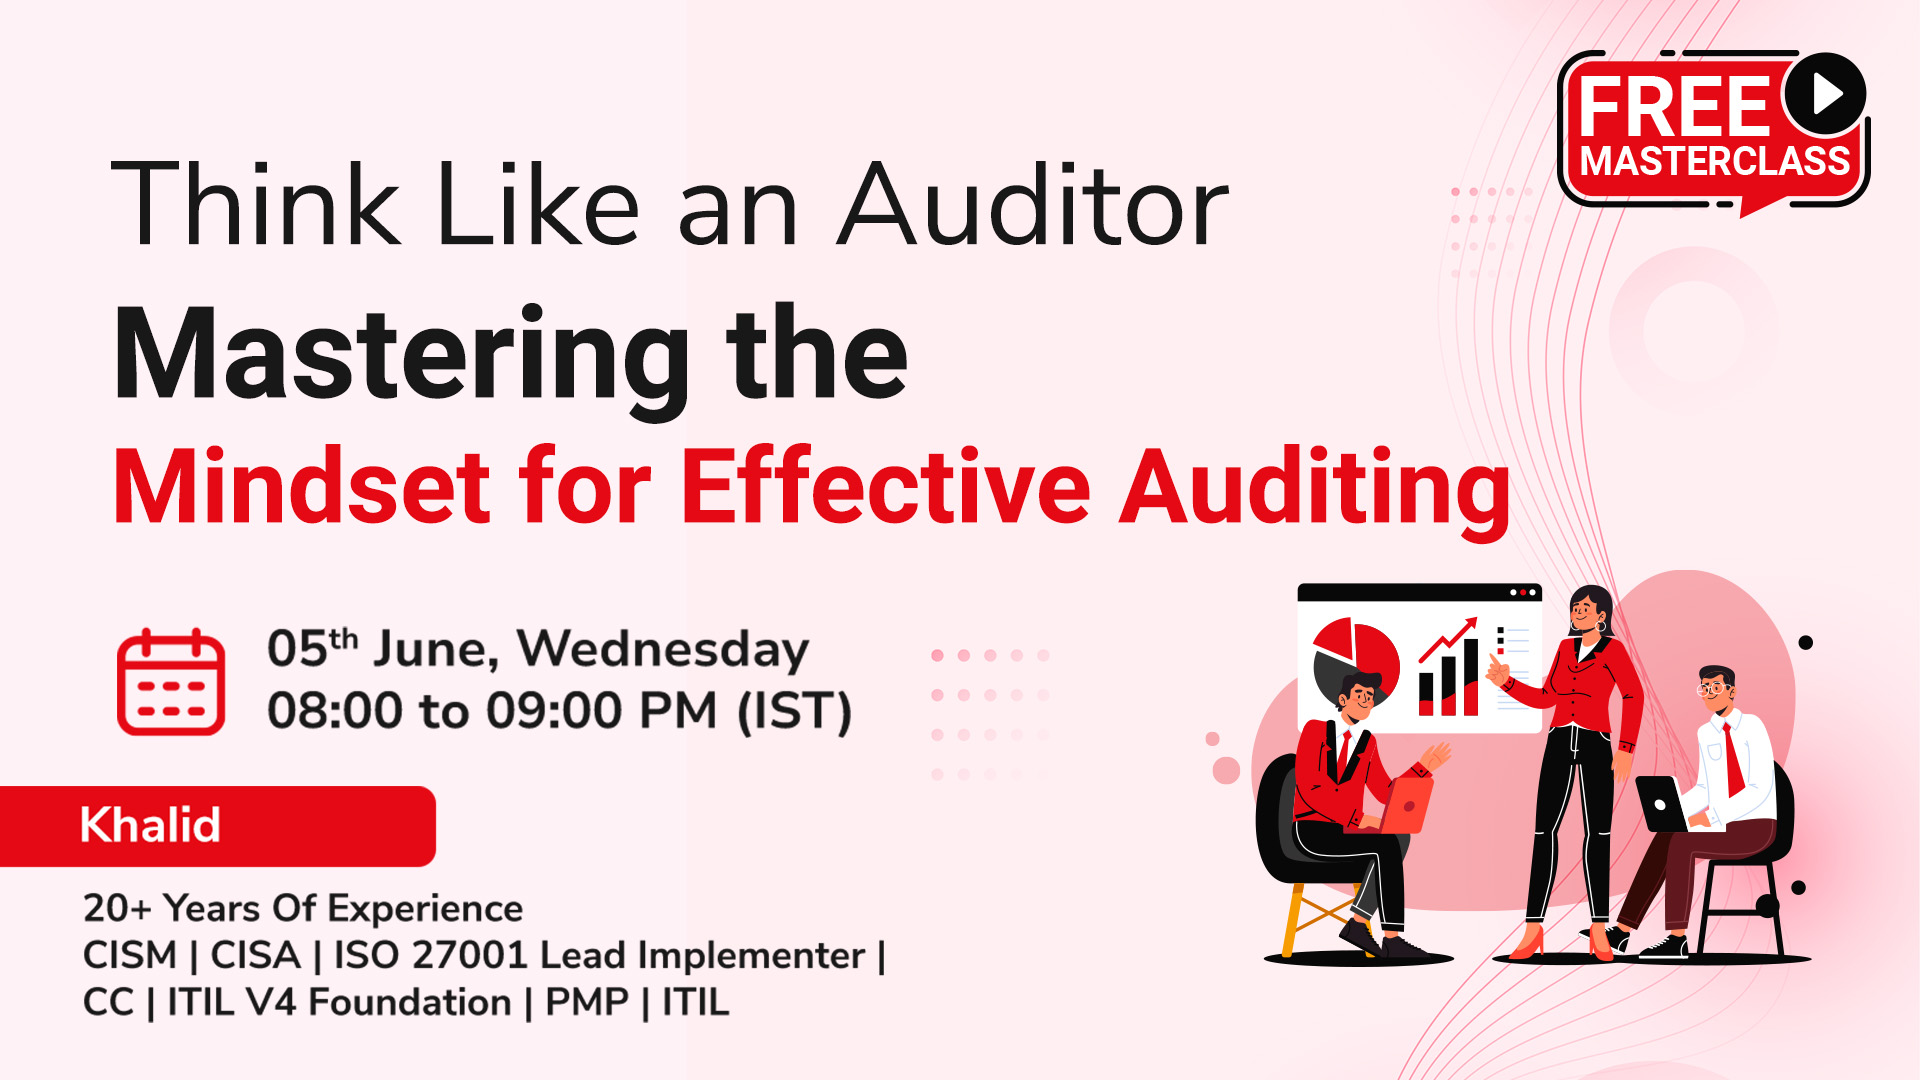 Think Like an Auditor Mastering the Mindset for Effective Auditing